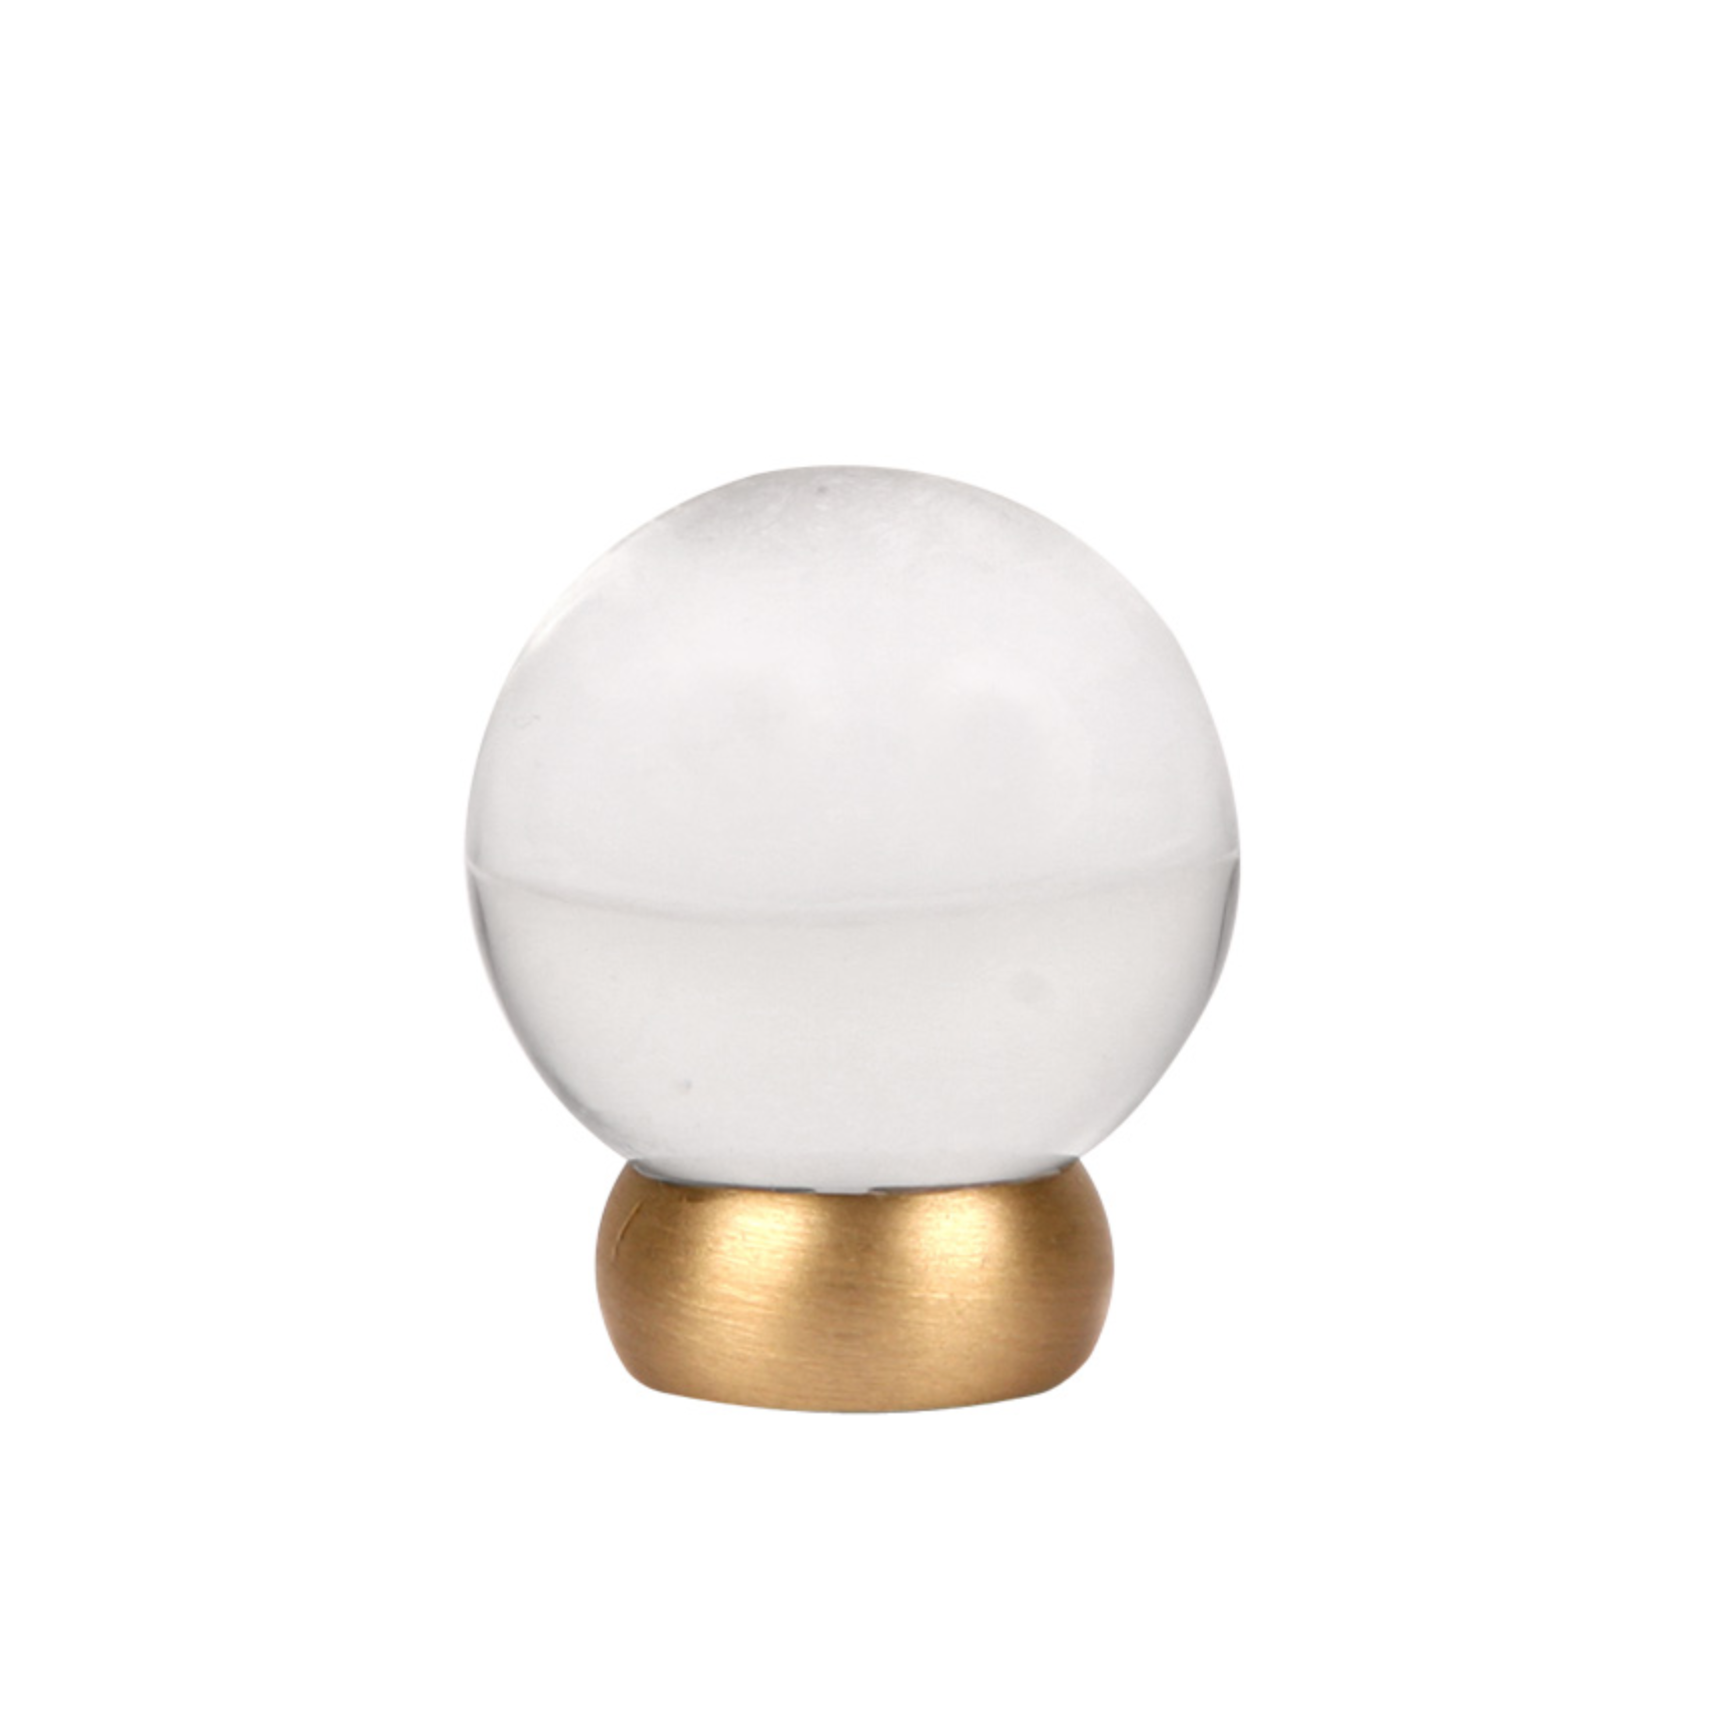 Round Lew's Hardware 66-401 Brass and Glass Cabinet Knob | Knobs